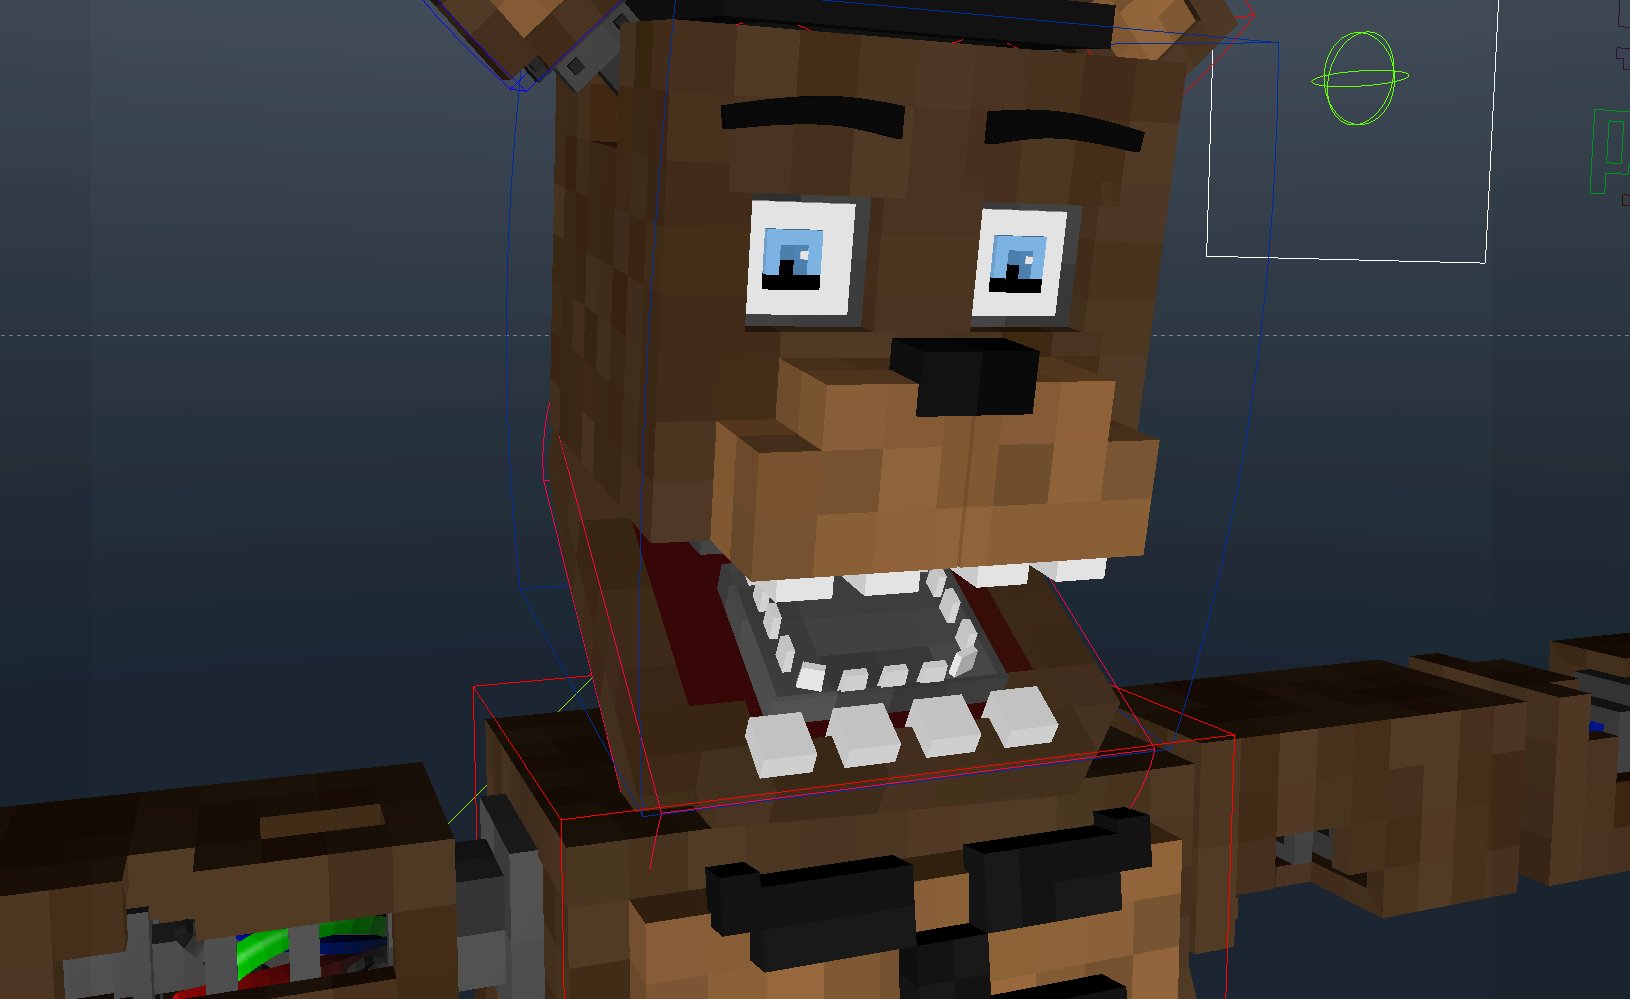 Withered Freddy - Five Nights at Freddy's 2 Minecraft Skin